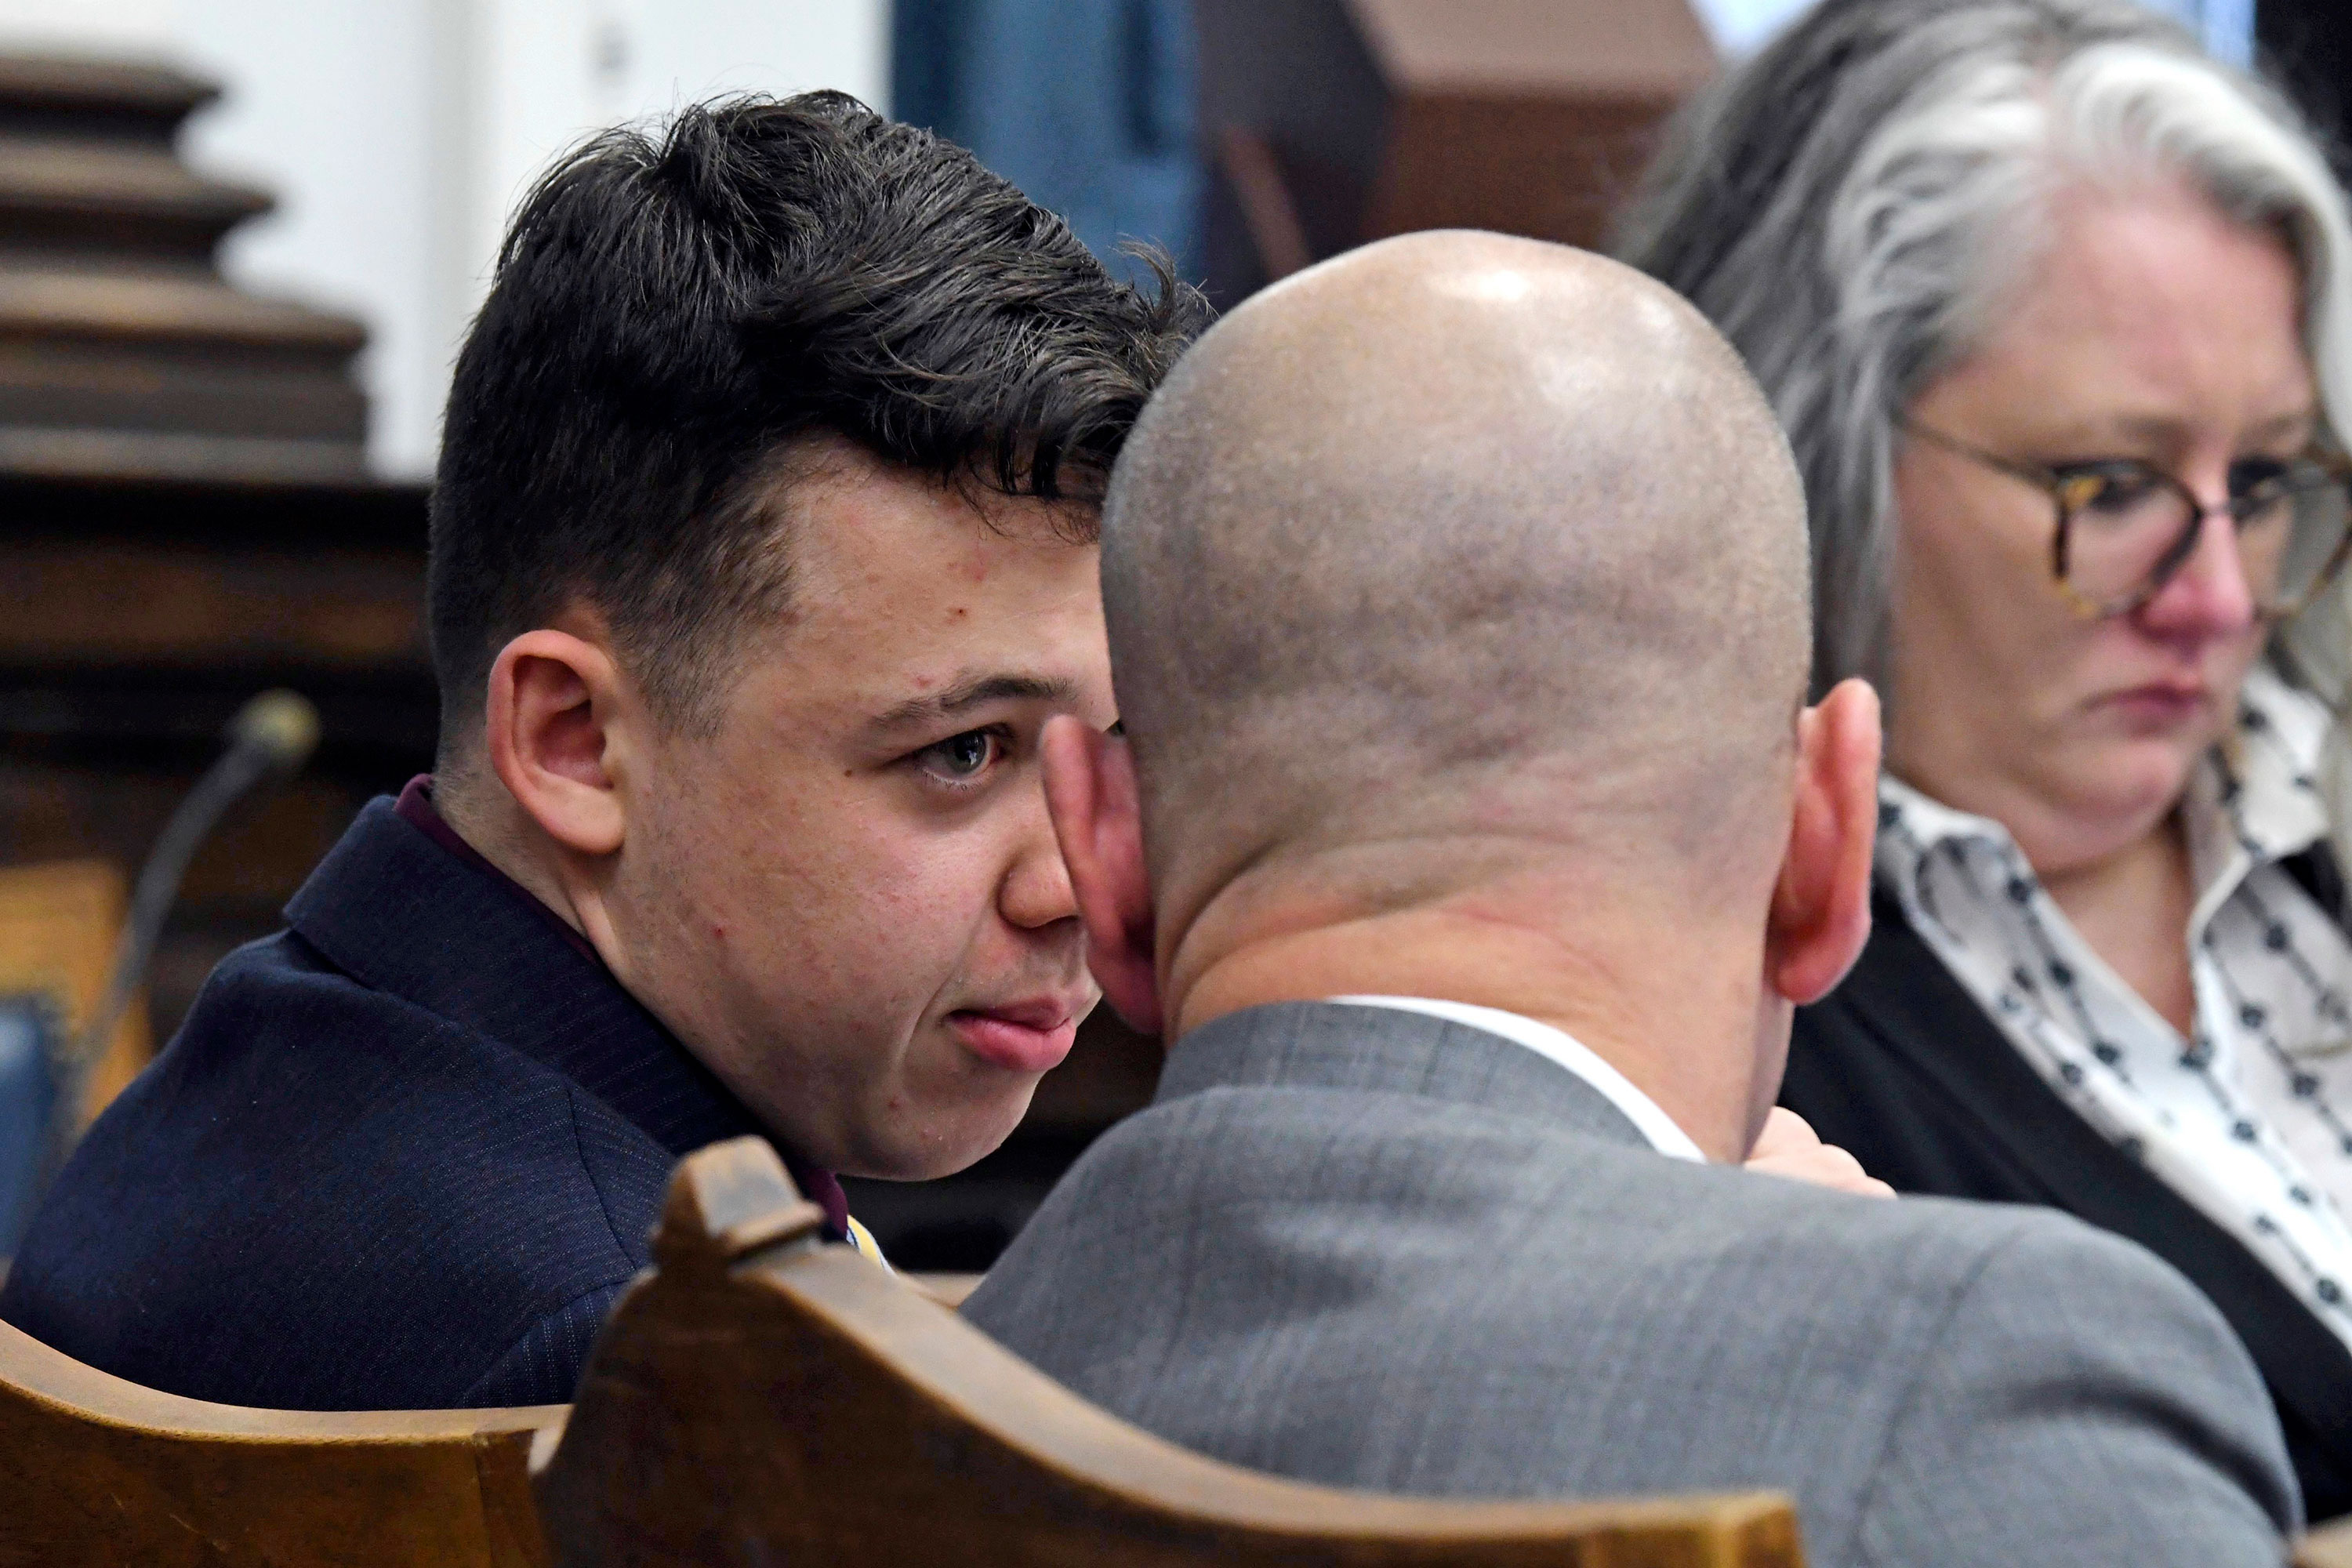 Kyle Rittenhouse, left, and defense attorney Corey Chirafisi confer during Rittenhouse's trial in Kenosha, Wisconsin, on Thursday.